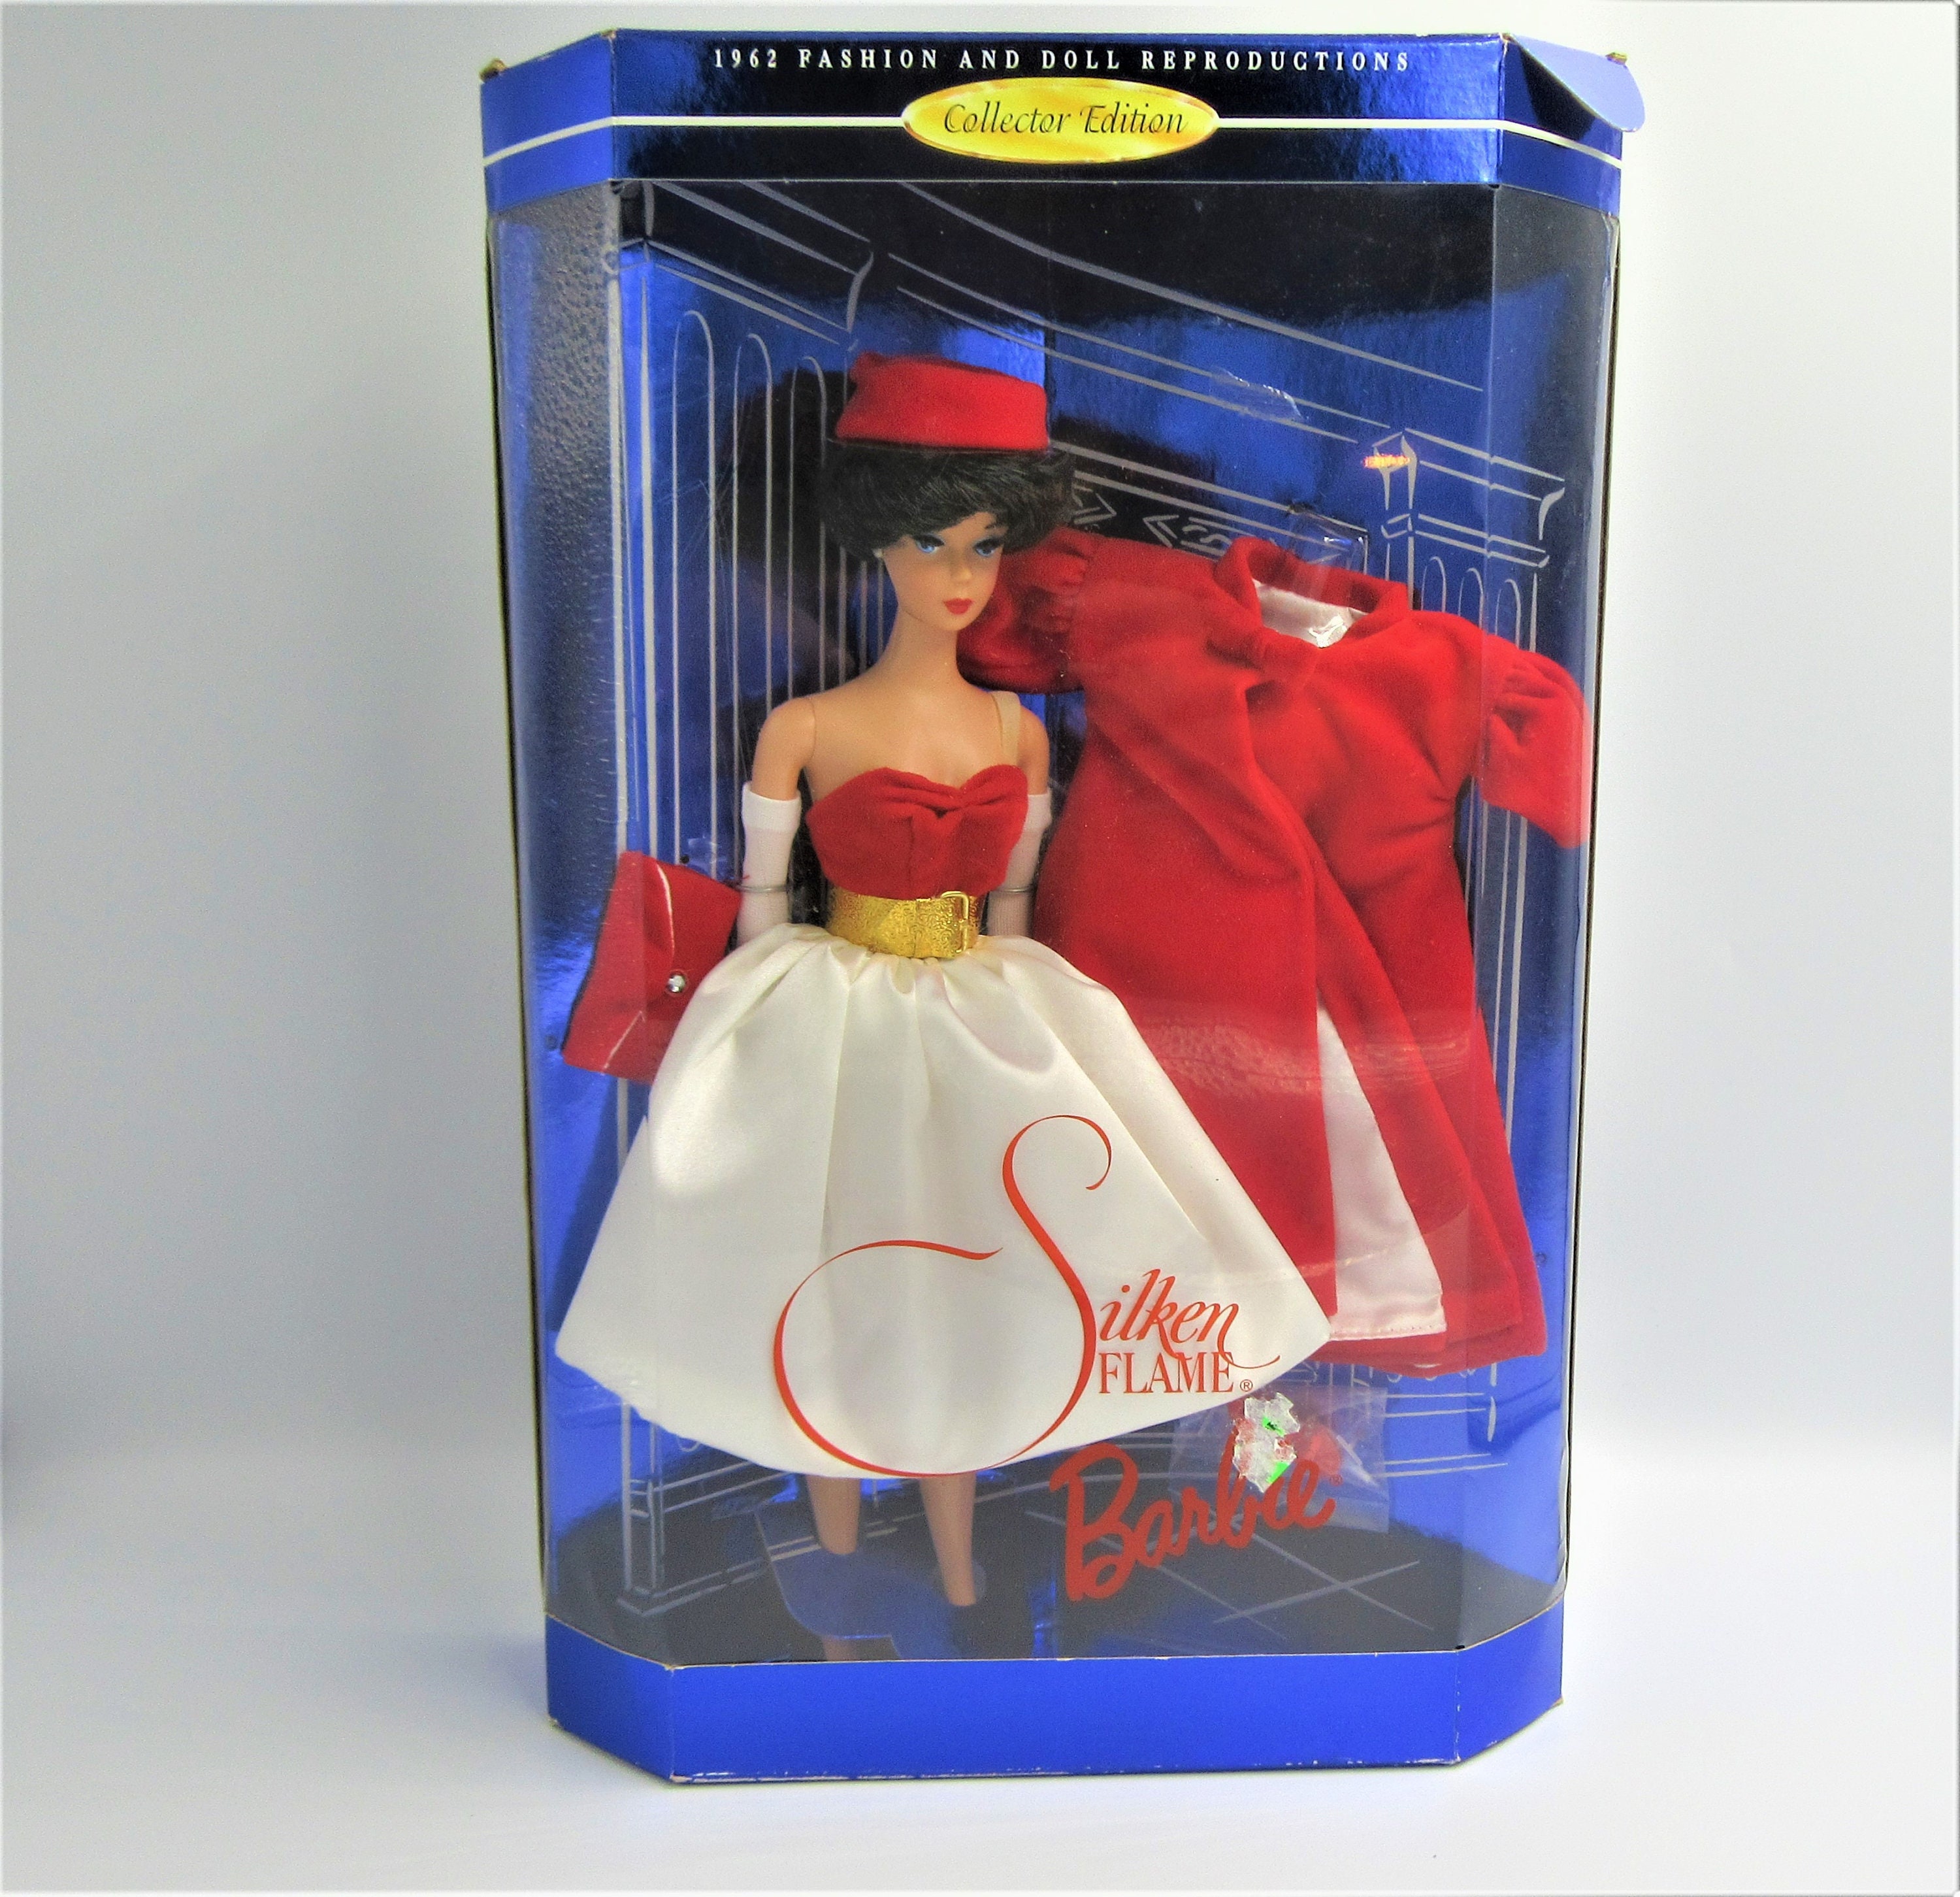 1997 BARBIE Doll Silken Flame 1962 Reproduction of Original - Etsy ...